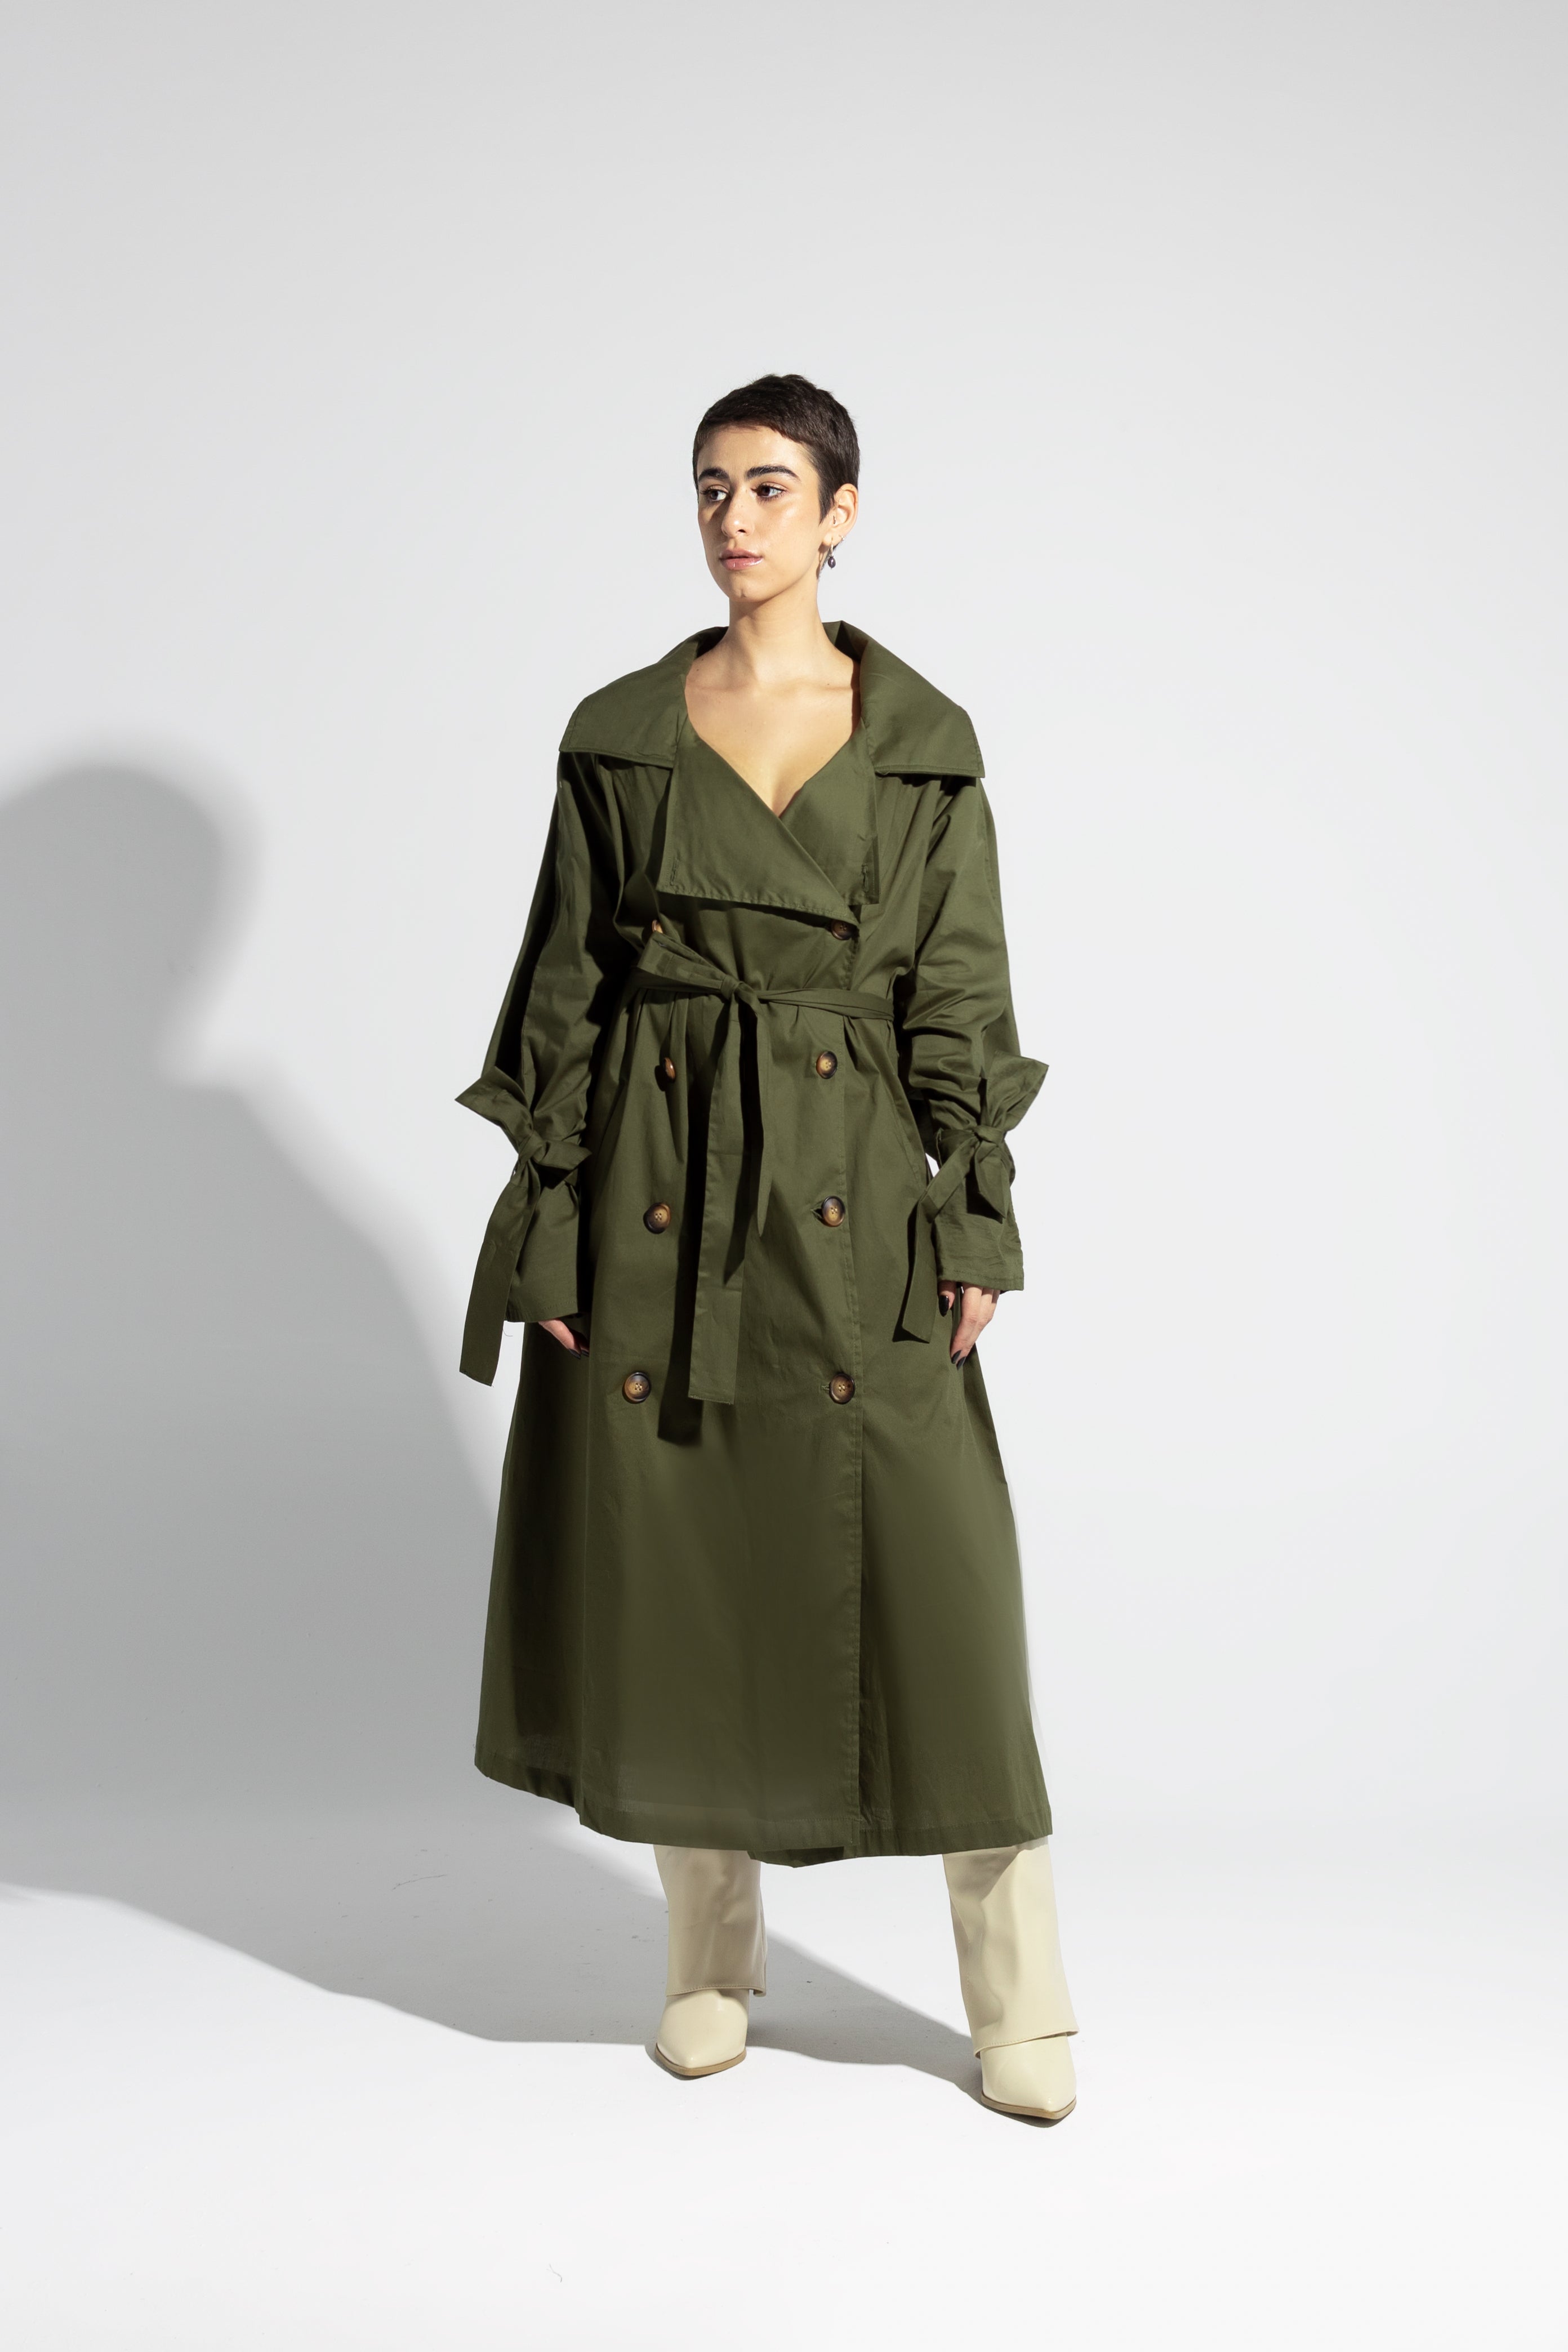 Ermanno Scervino Belted Trench Coat, $1,267, farfetch.com